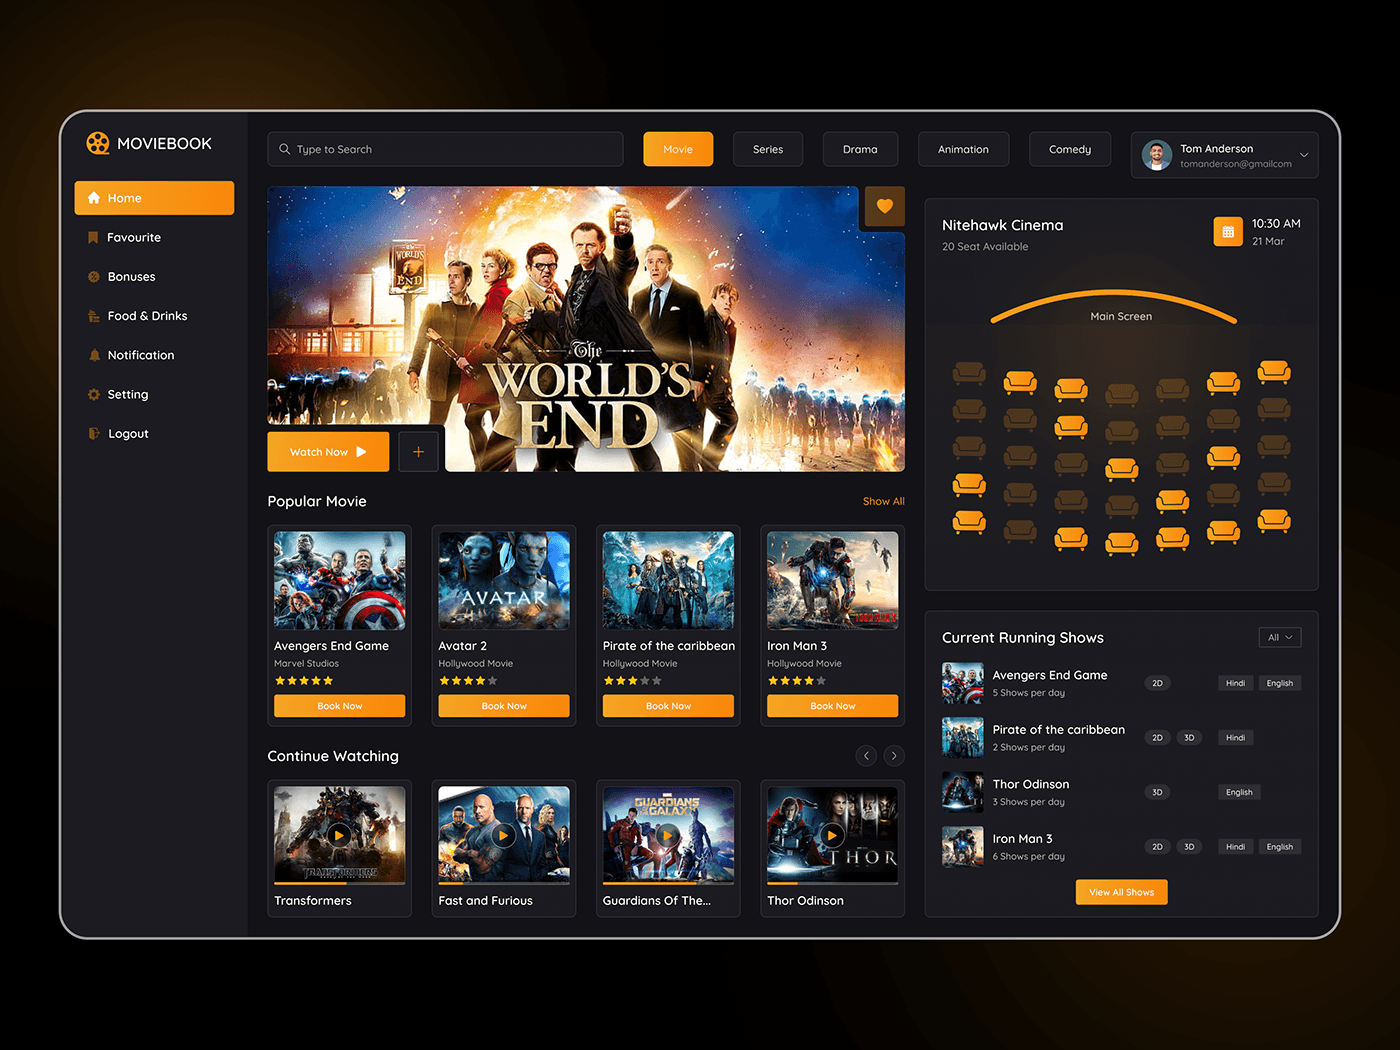 movie booking pos system dashboard theater  Cinema Mockup creative full design Collection UI/UX